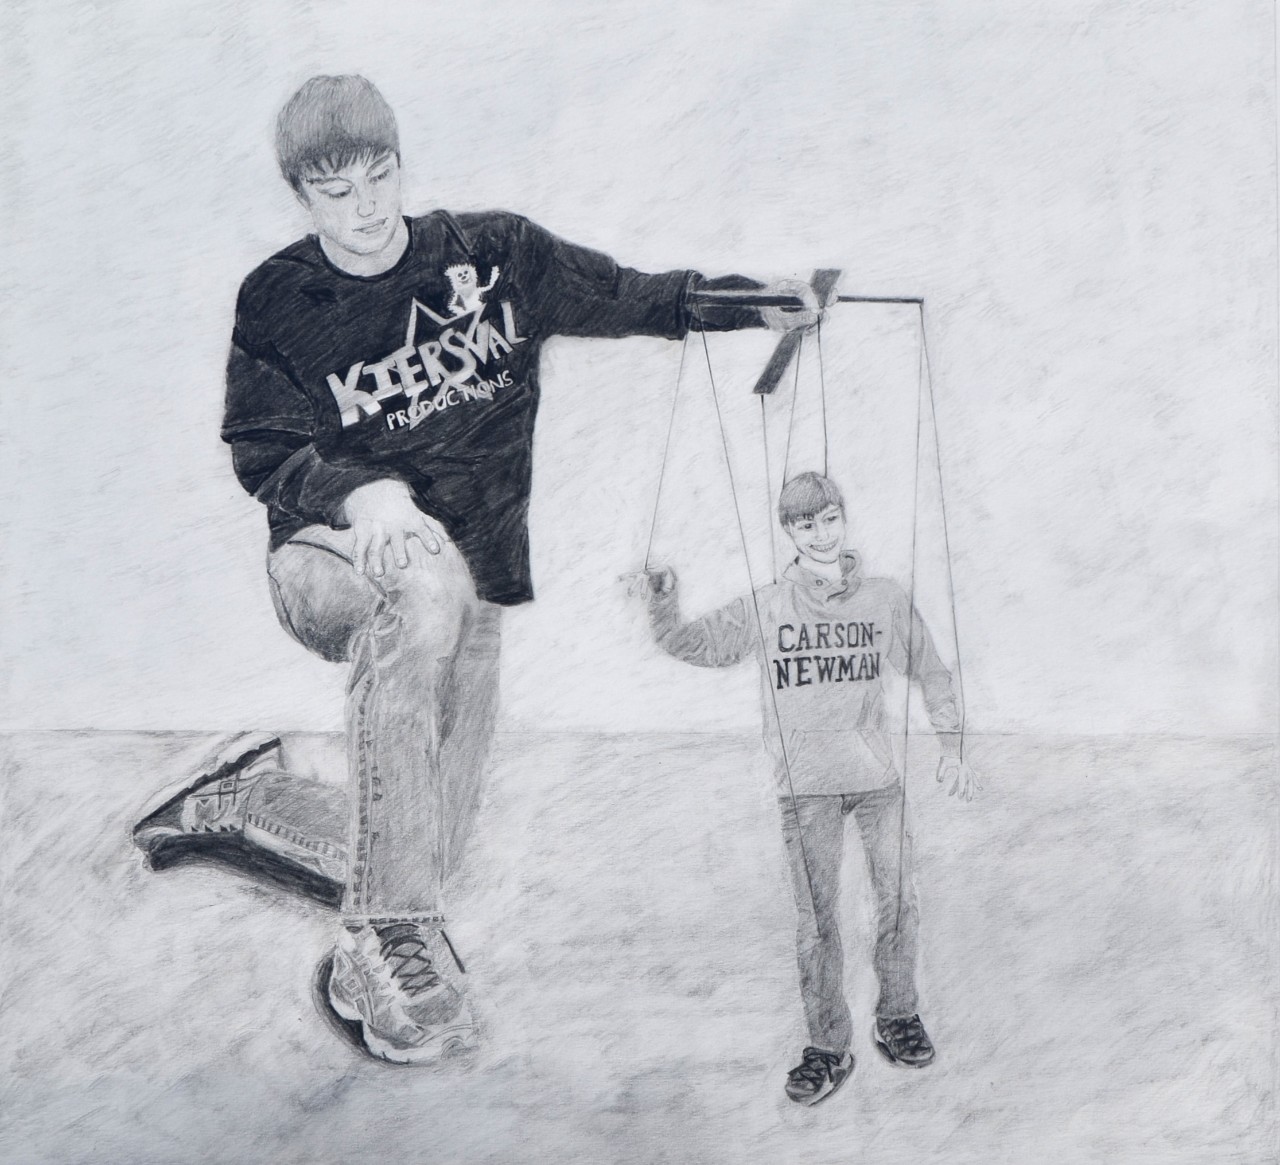  a detailed pencil drawing by Kieran Braun called, “Manipulation”. It features a young man in jeans and a dark t-shirt that has the word “Kiersval Productions” written across it. He is kneeling and holding a marionette on a frame with strings. The marionette is a boy wearing a Carson-Newman sweatshirt.